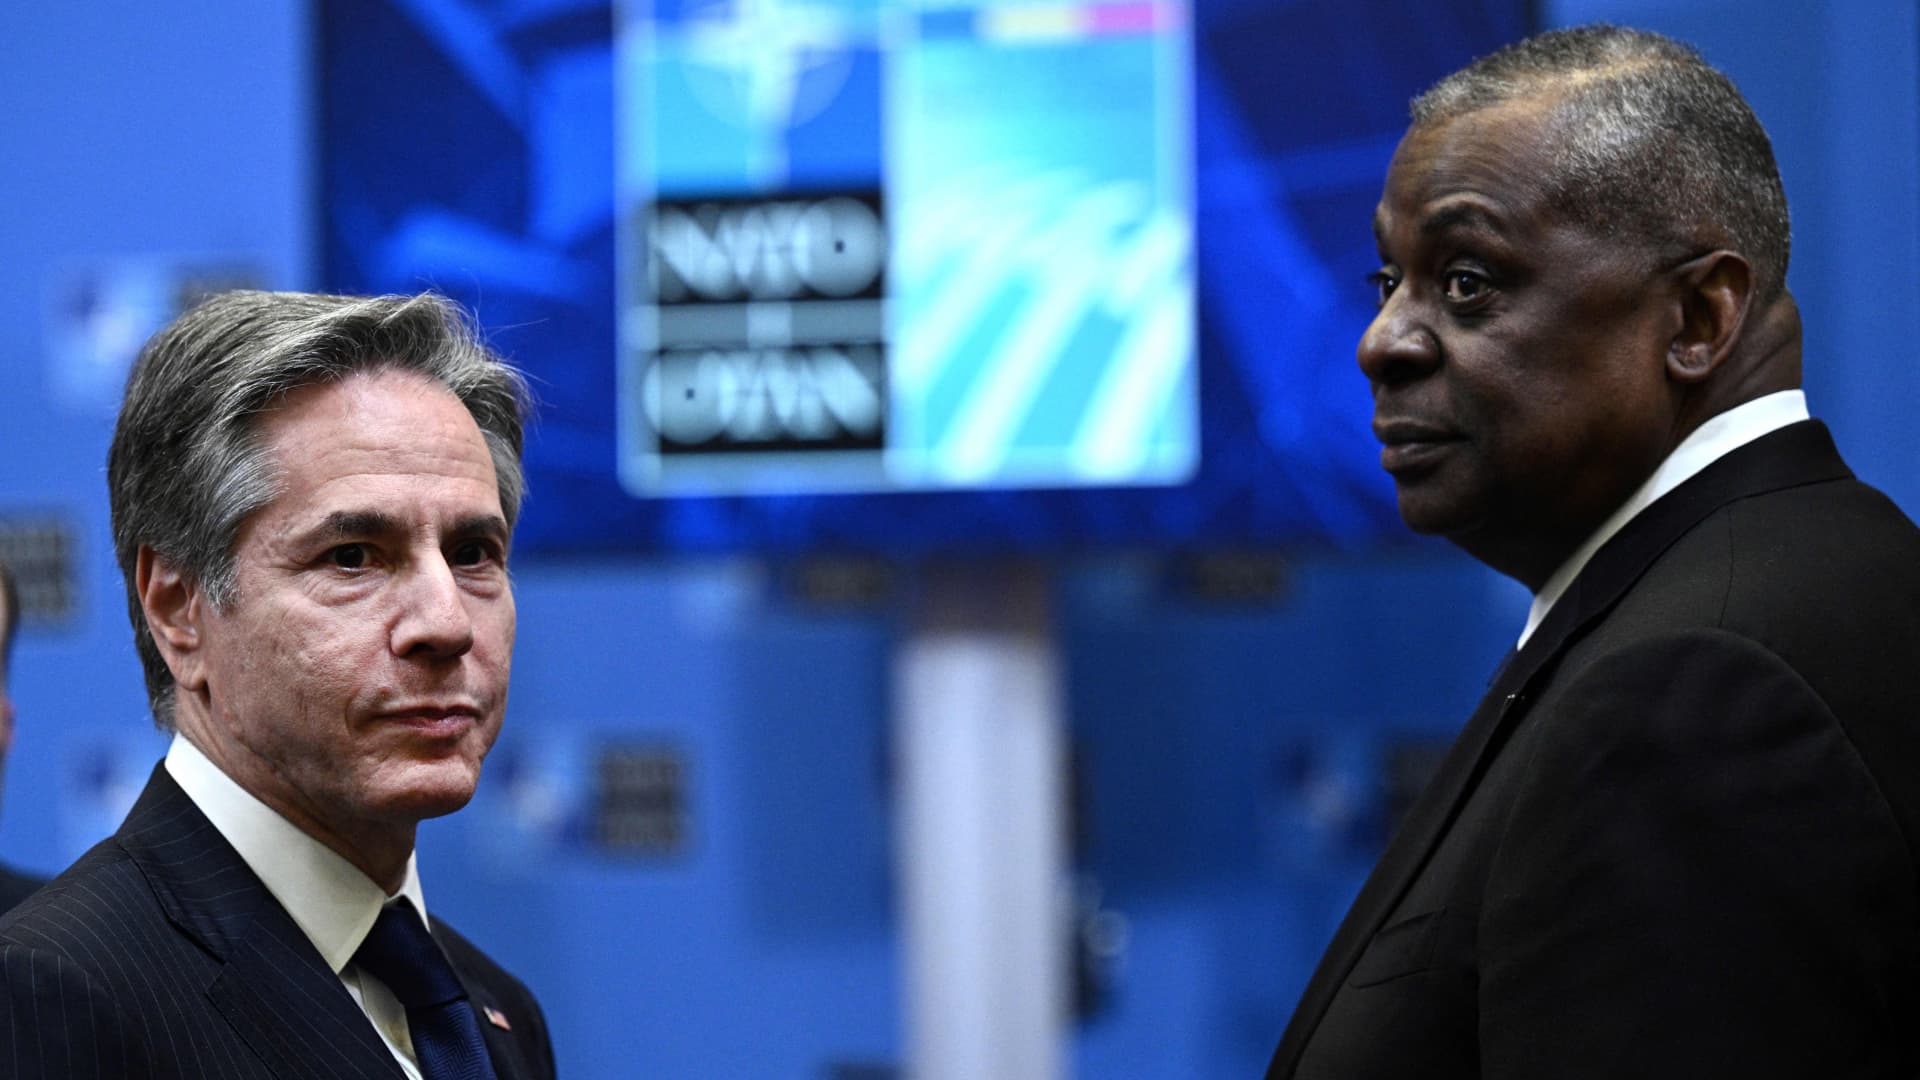 US Secretary of Defence Lloyd Austinand US Secretary of State Antony Blinken look on ahead of a press conference by the US President at NATO Headquarters in Brussels on March 24, 2022.